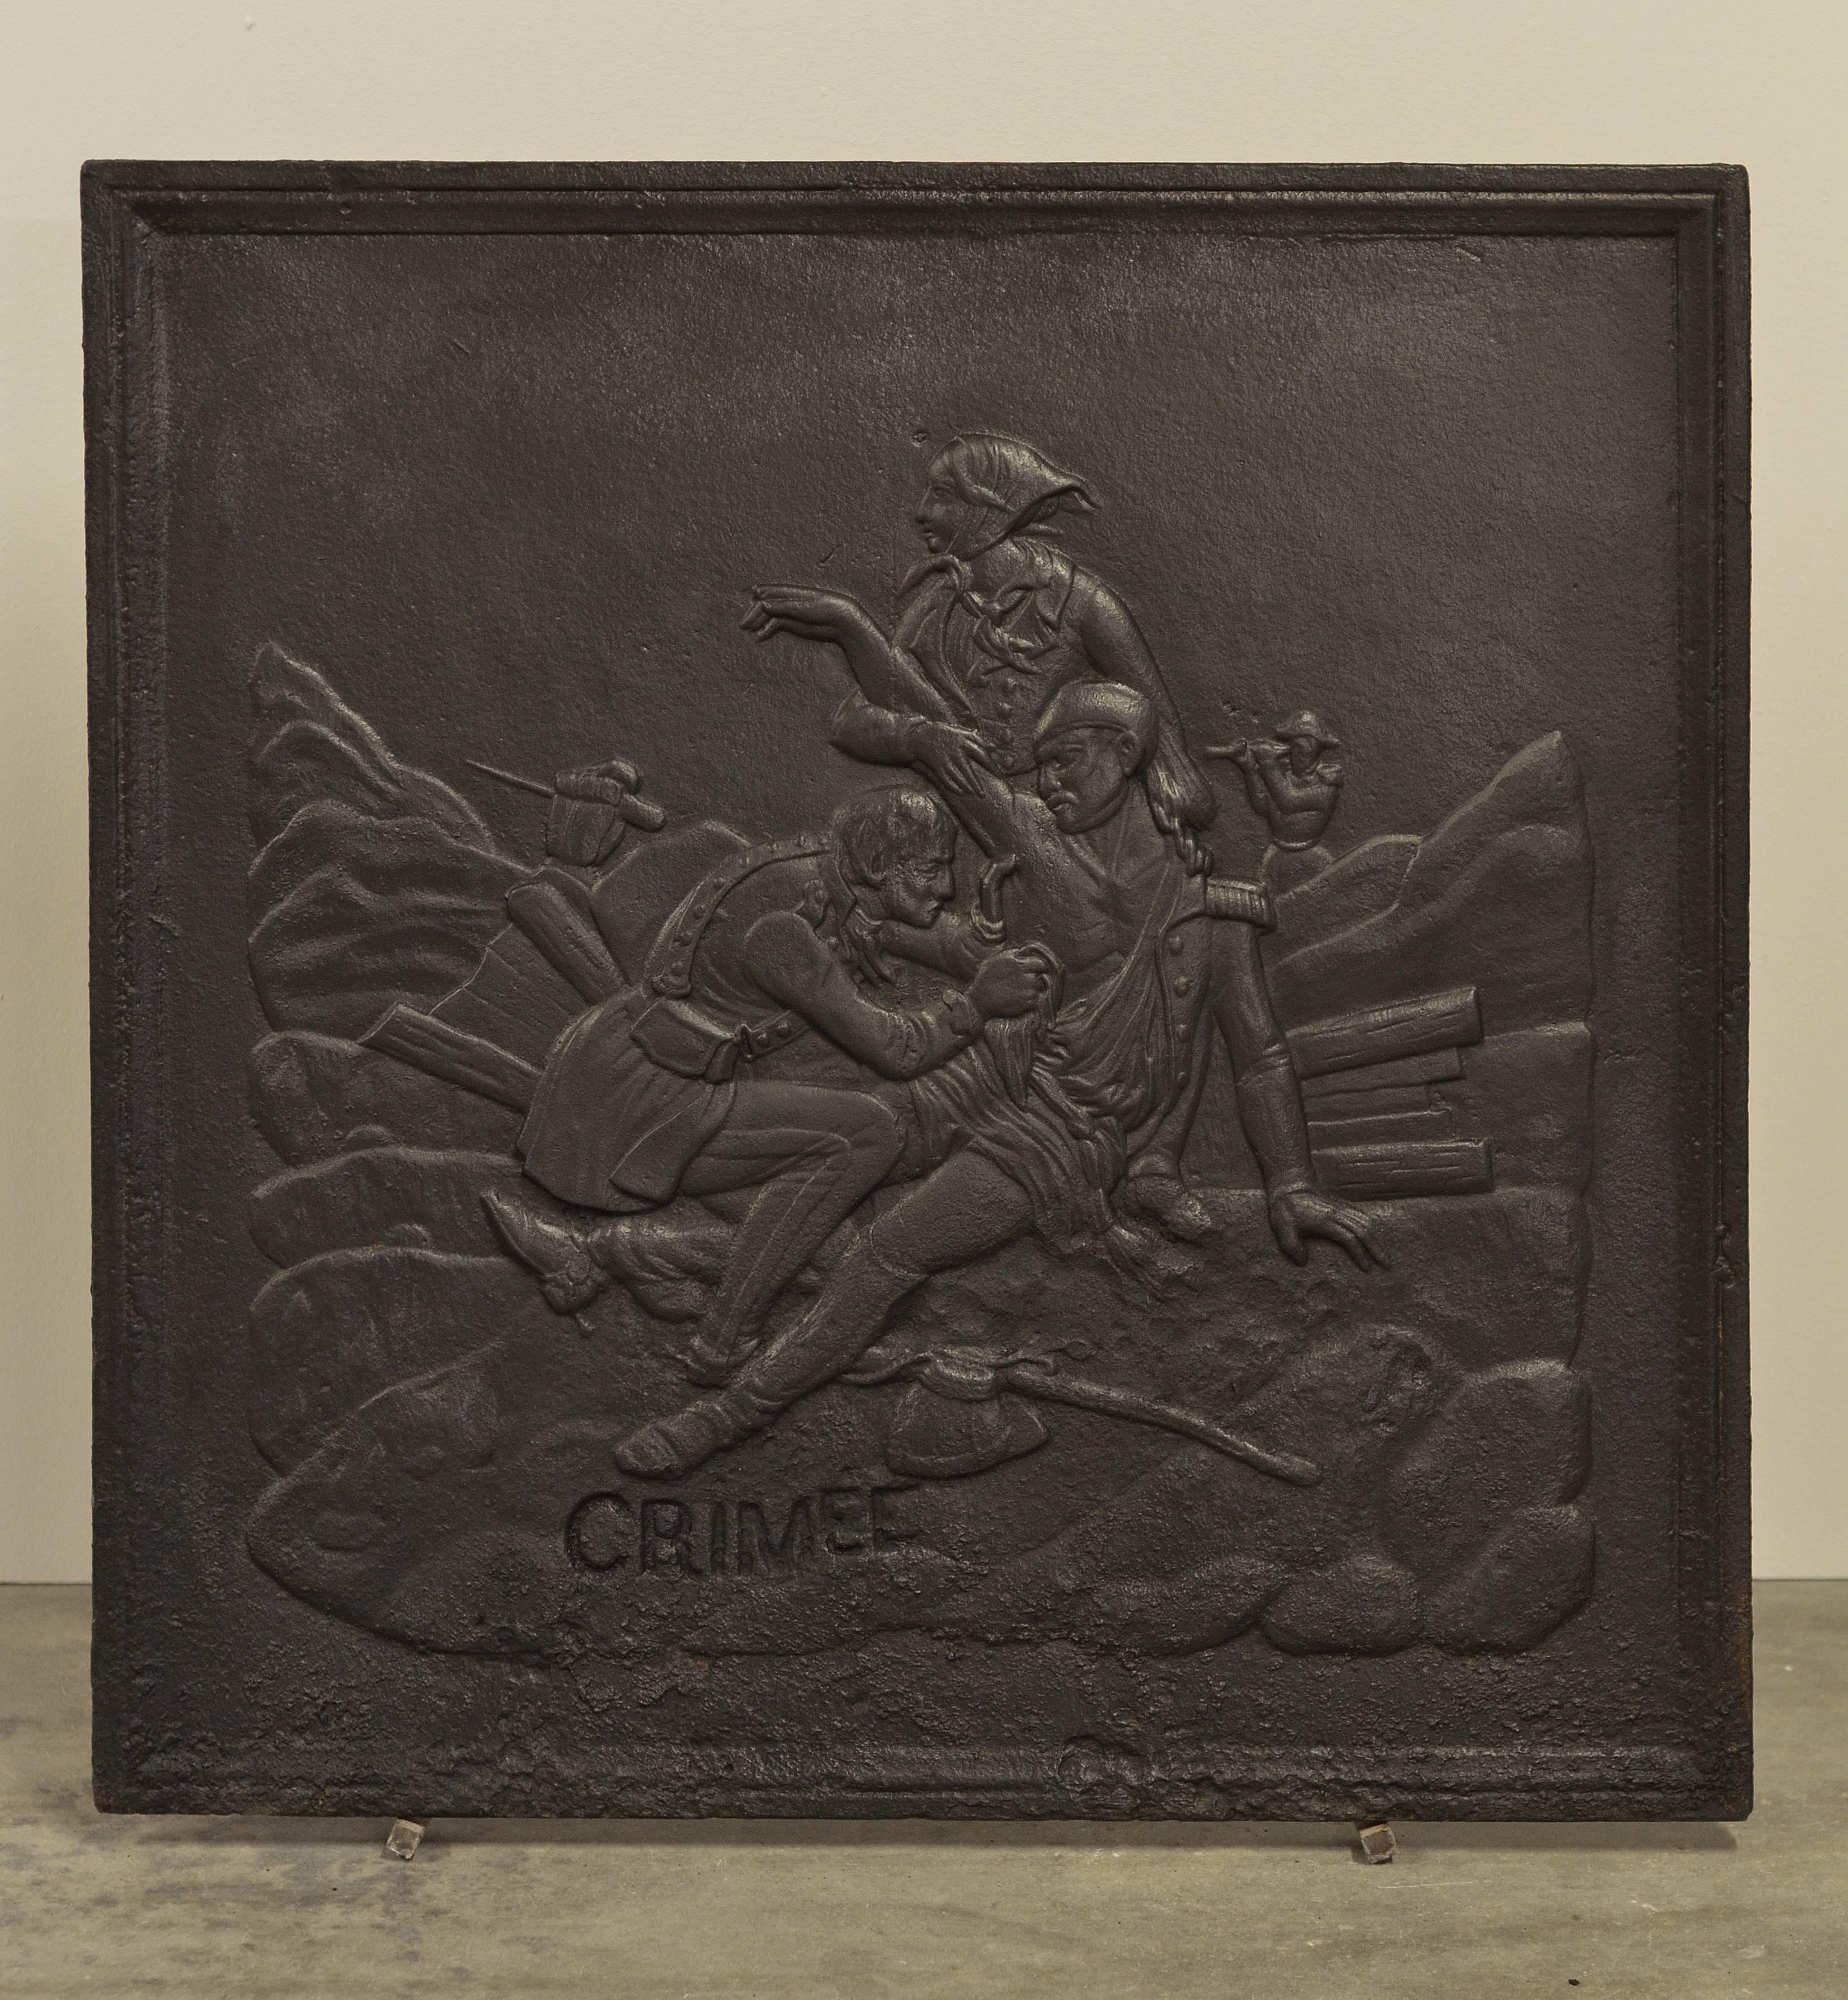 Nice square cast iron fireback displaying a wounded soldier during the Crimean war between the Russian Empire and the Ottoman Empire.

Excellent condition and usable size.
This fireback is in excellent condition it can be used in a fireplace or